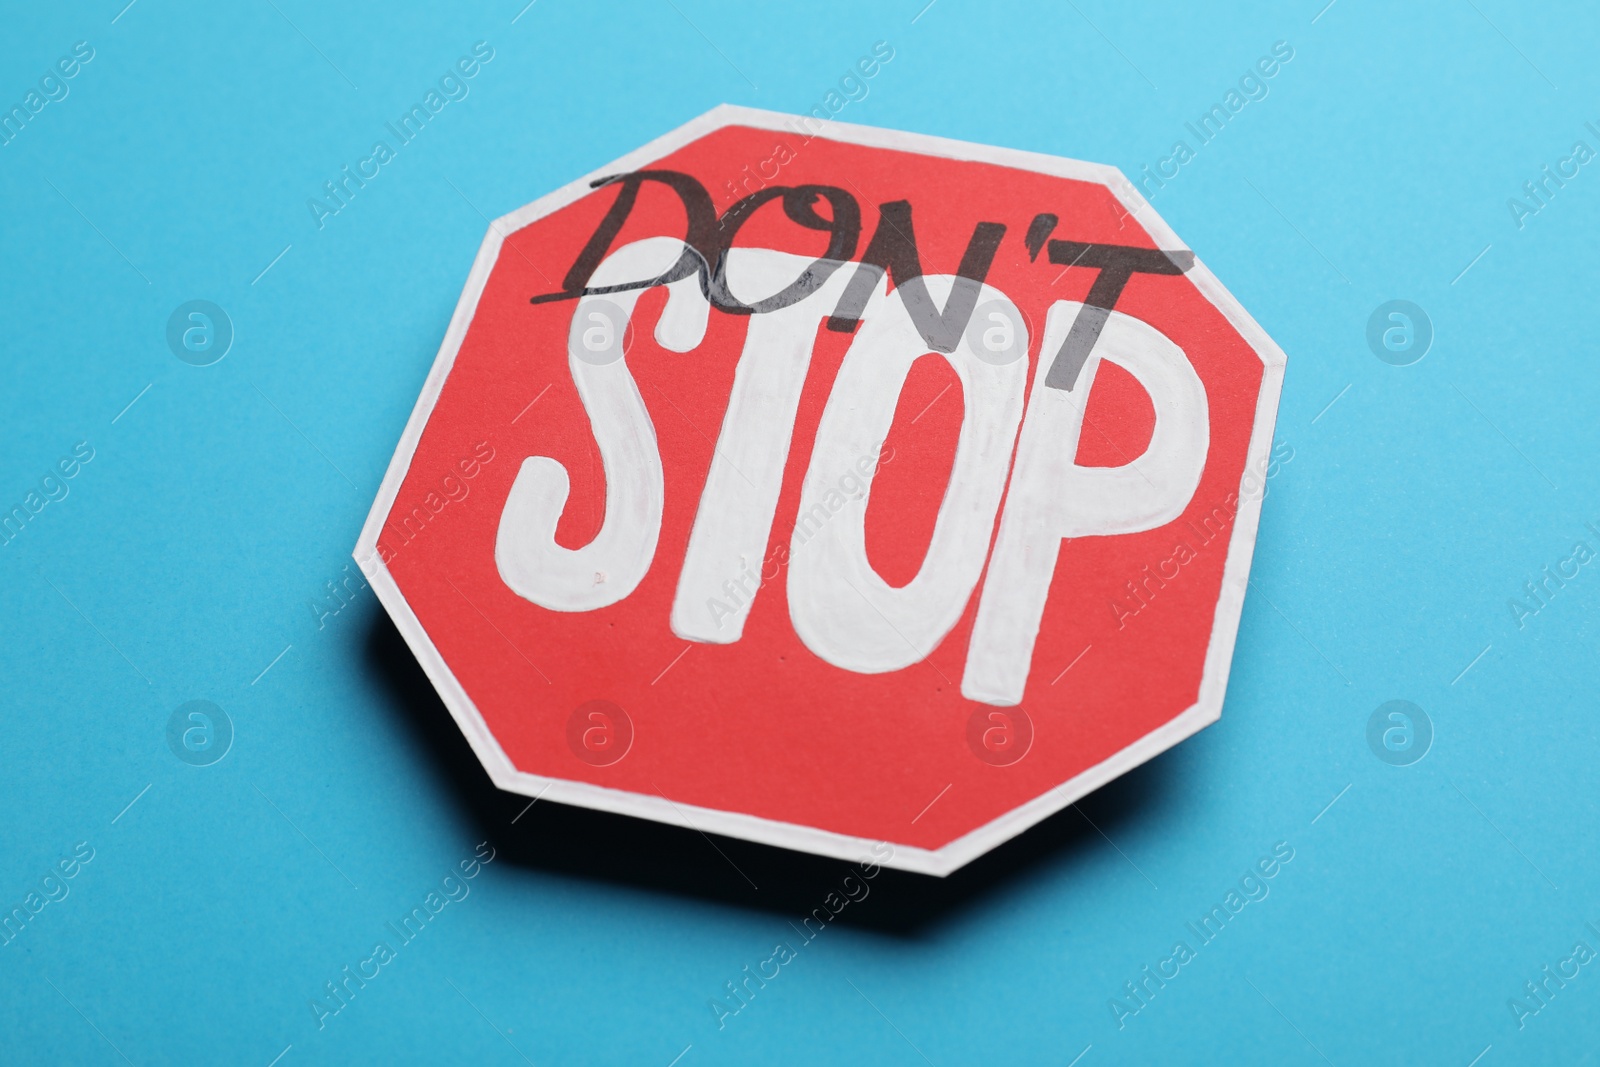 Photo of Don't stop - motivational phrase. Road sign sticker with added written text on light blue background